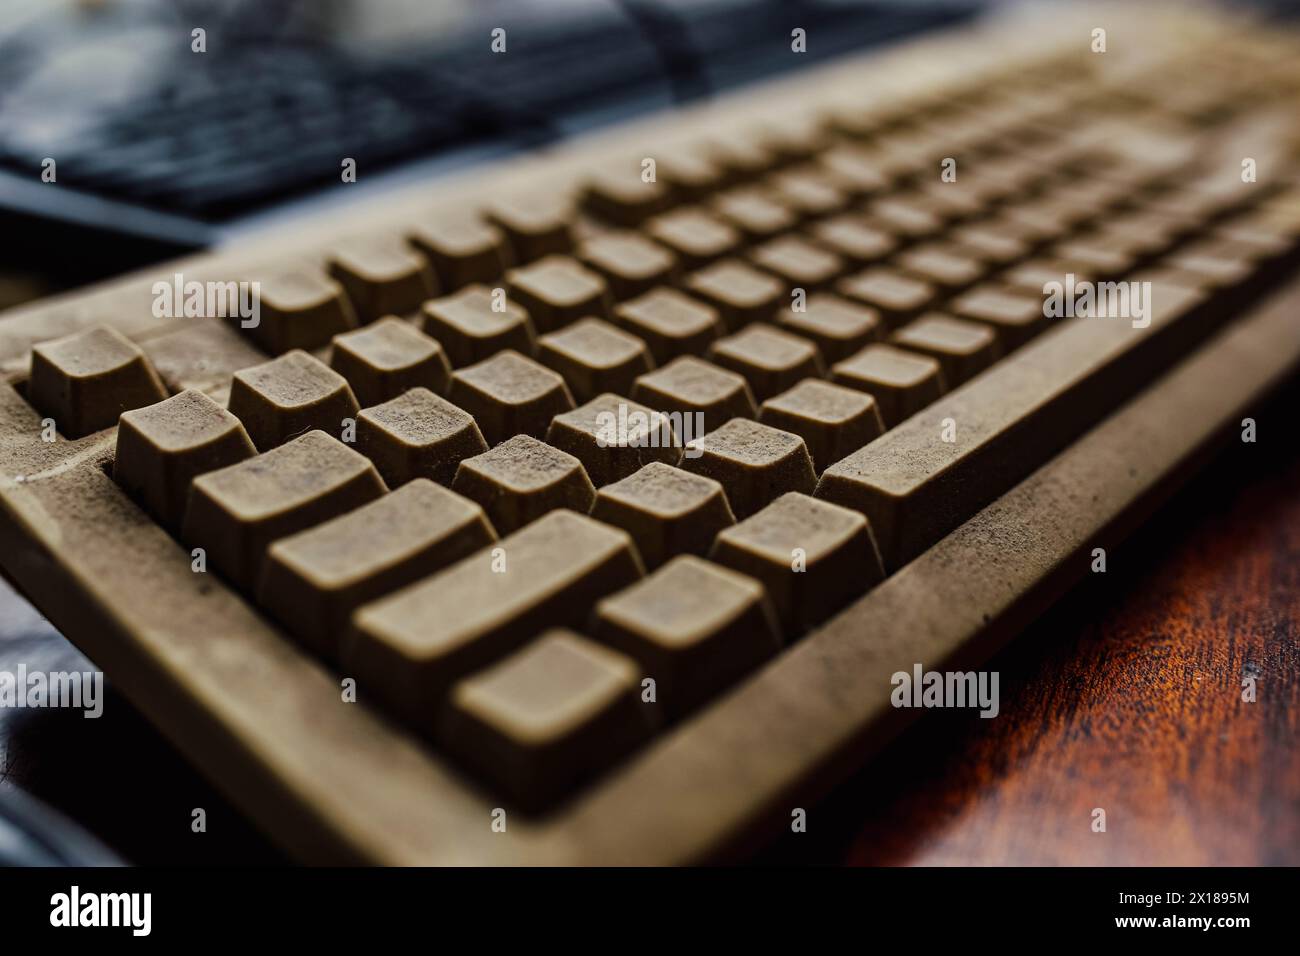 Old vintage computer mechanical keyboard in dust, computer keyboard from the 1980s Stock Photo